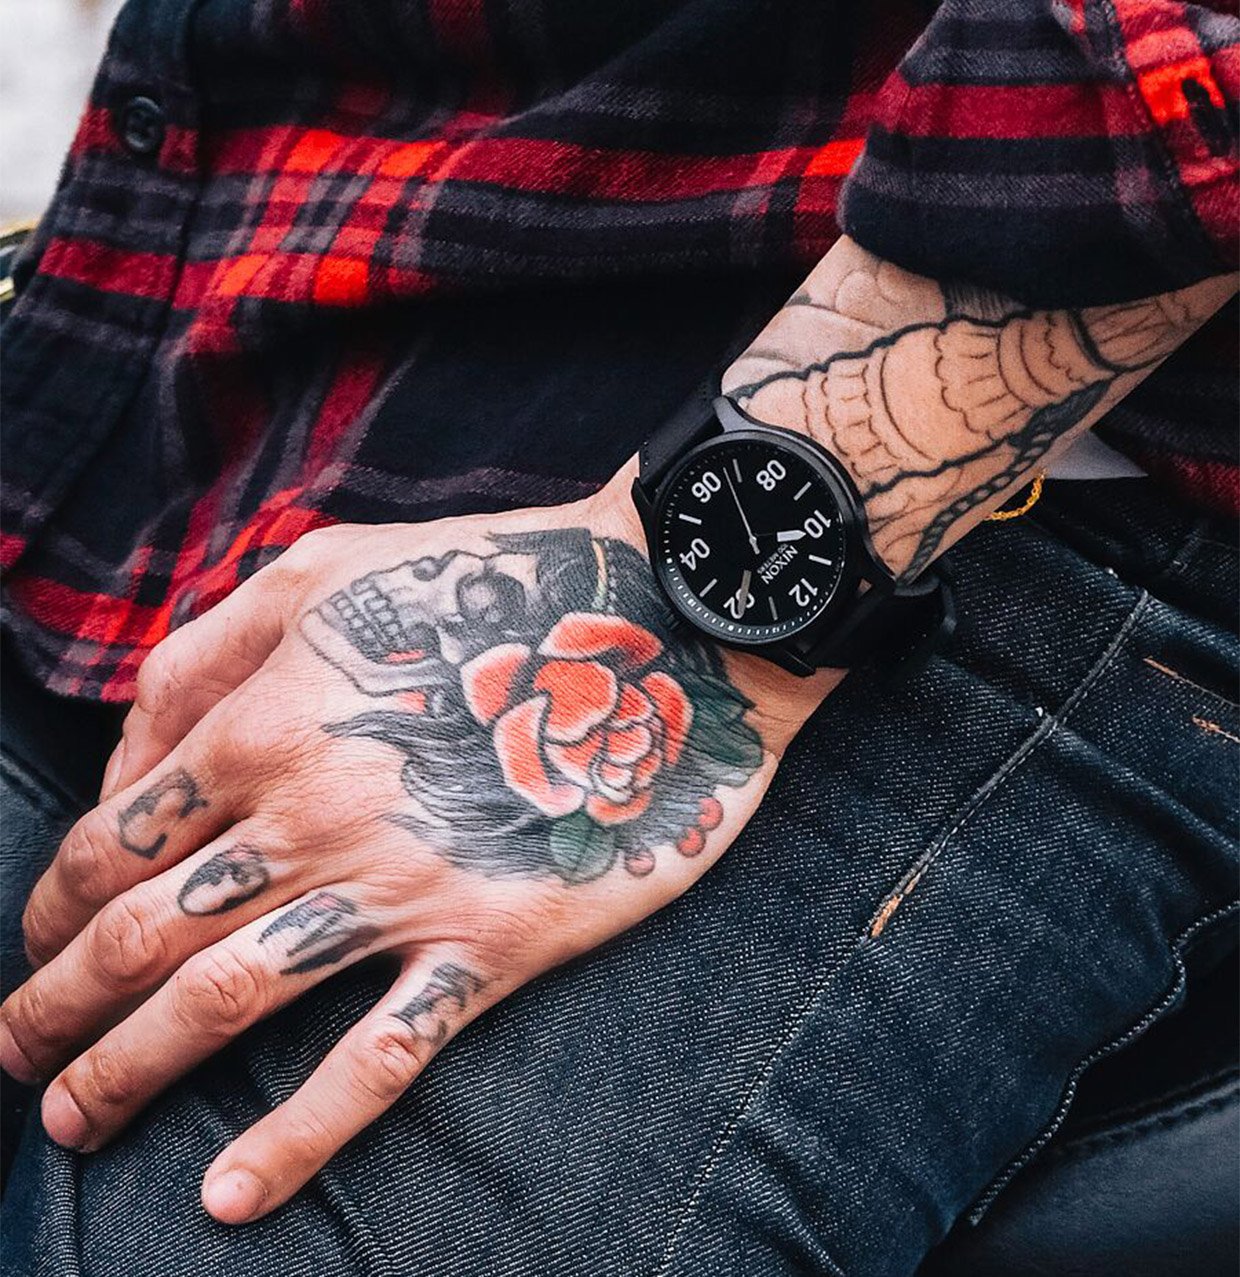 Nixon Patrol Watches are Bold and Easy to Read